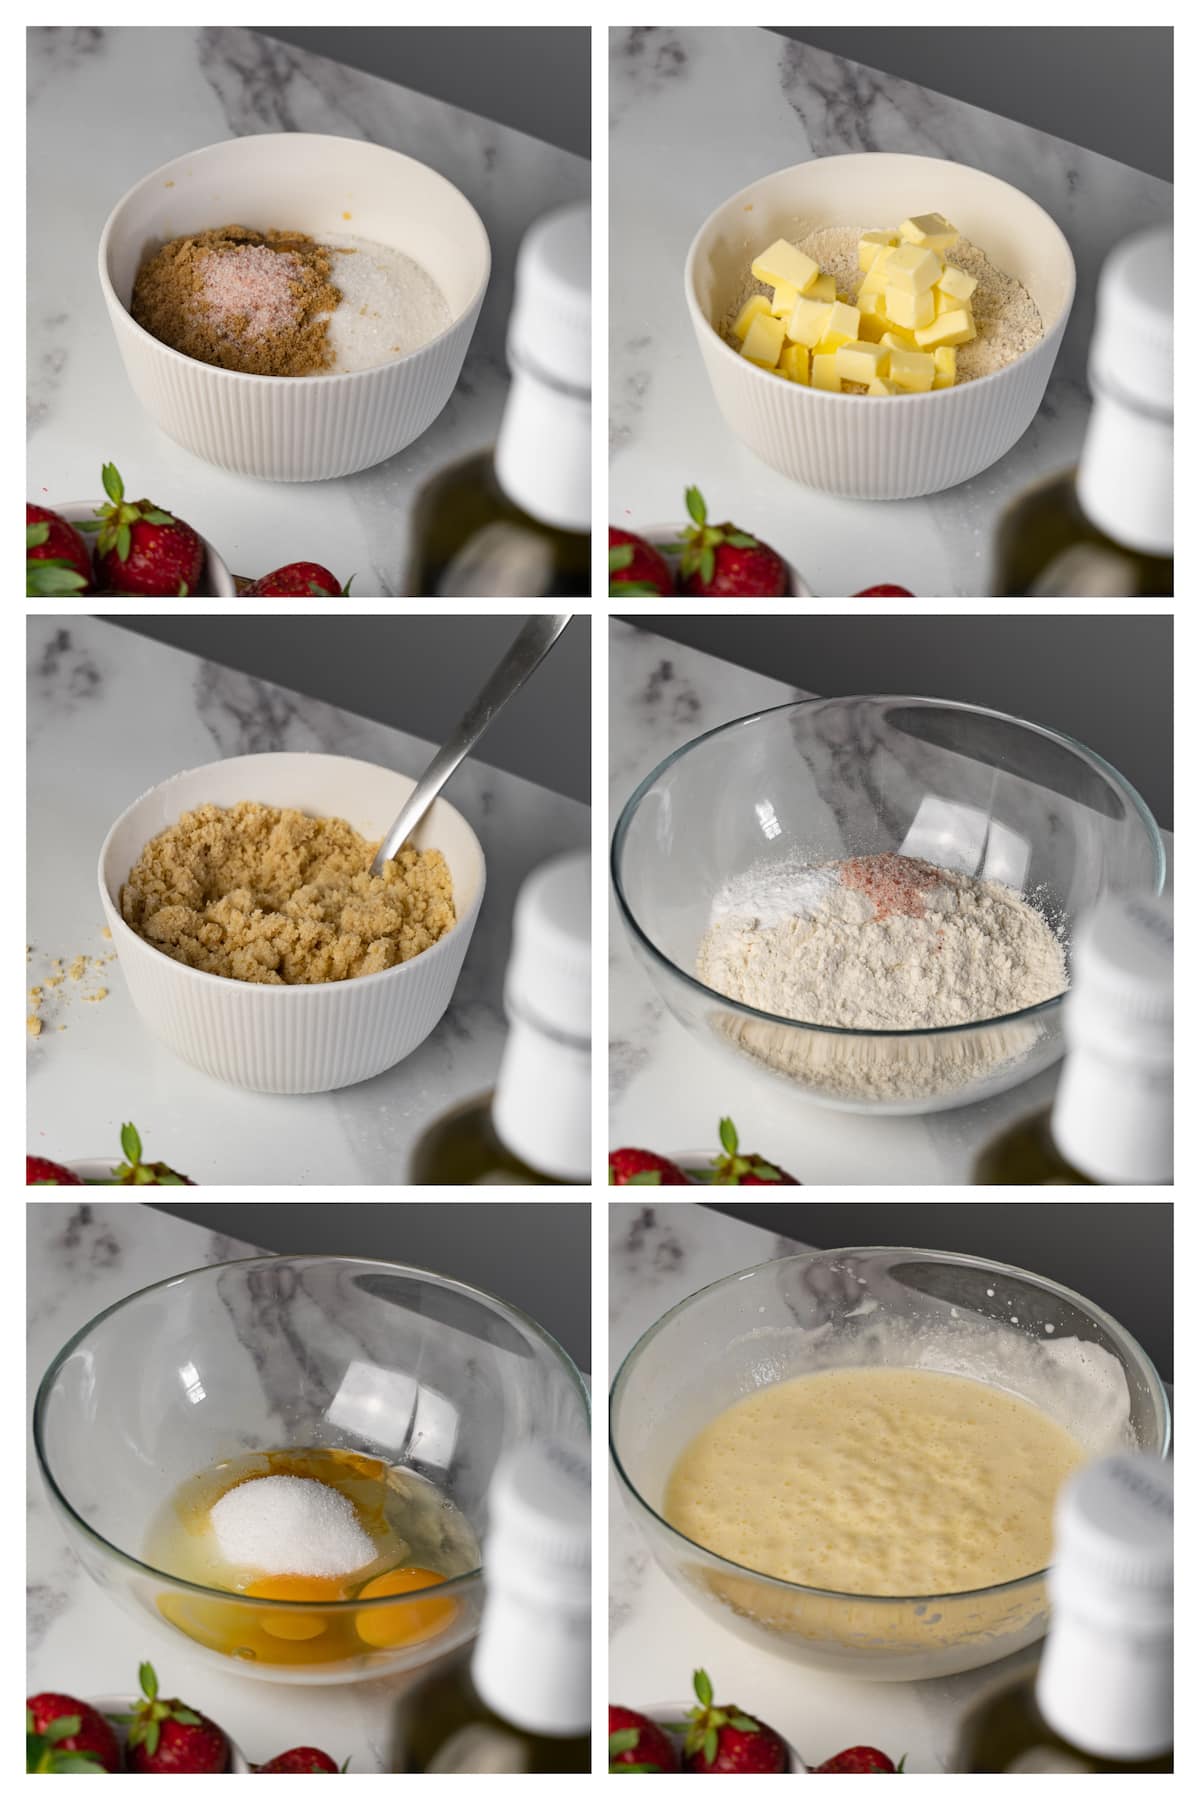 The collage image shows six steps to make streusel topping and batter for strawberry cake.